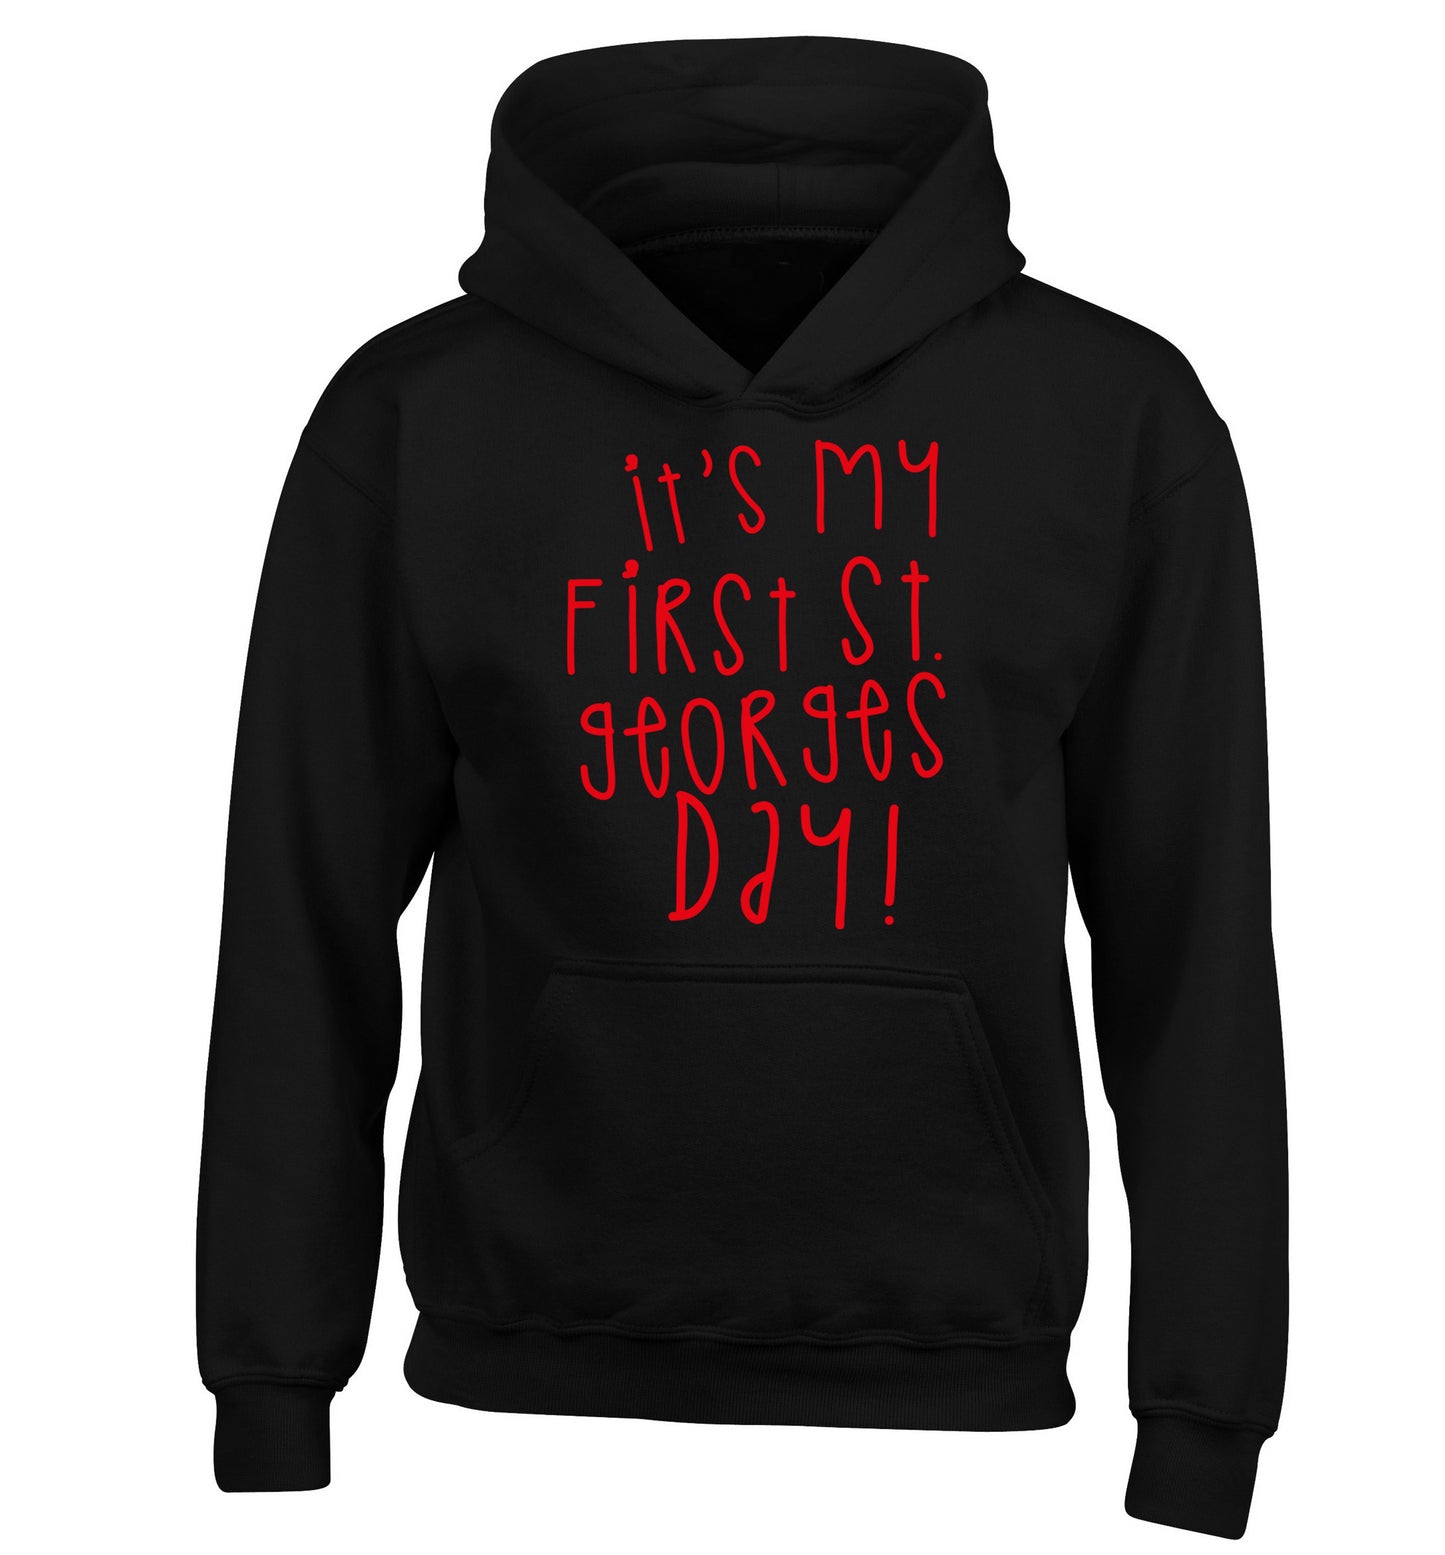 It's my first St Georges day children's black hoodie 12-14 Years